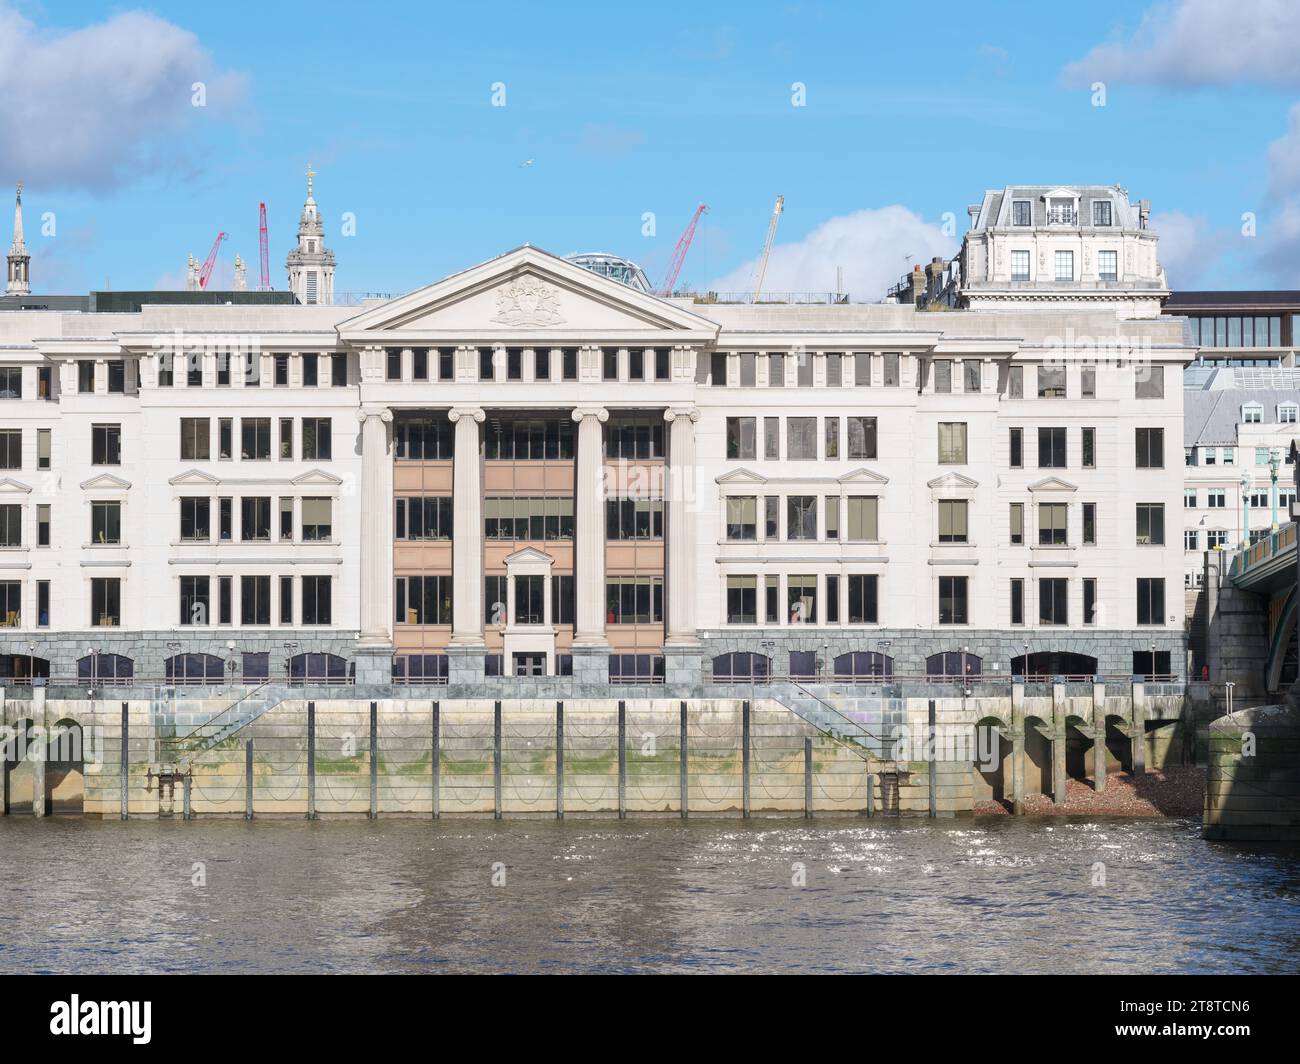 Vintner's Place, on a bank of the river Thames by Southwark bridge, London, England. Stock Photo